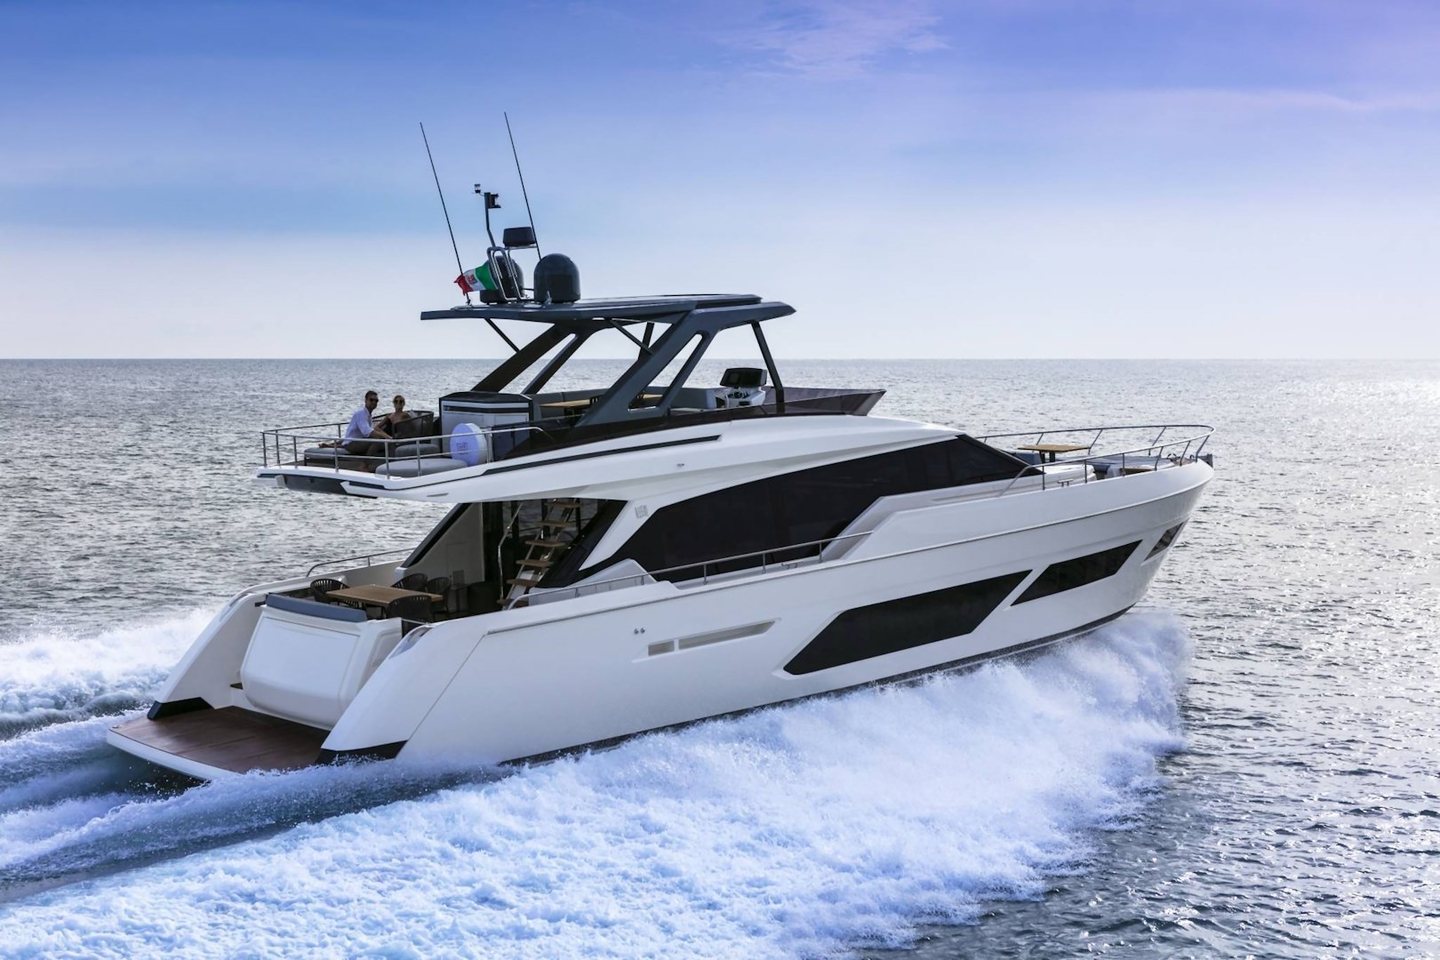 360 VR Virtual Tours of the Ferretti Yachts 720